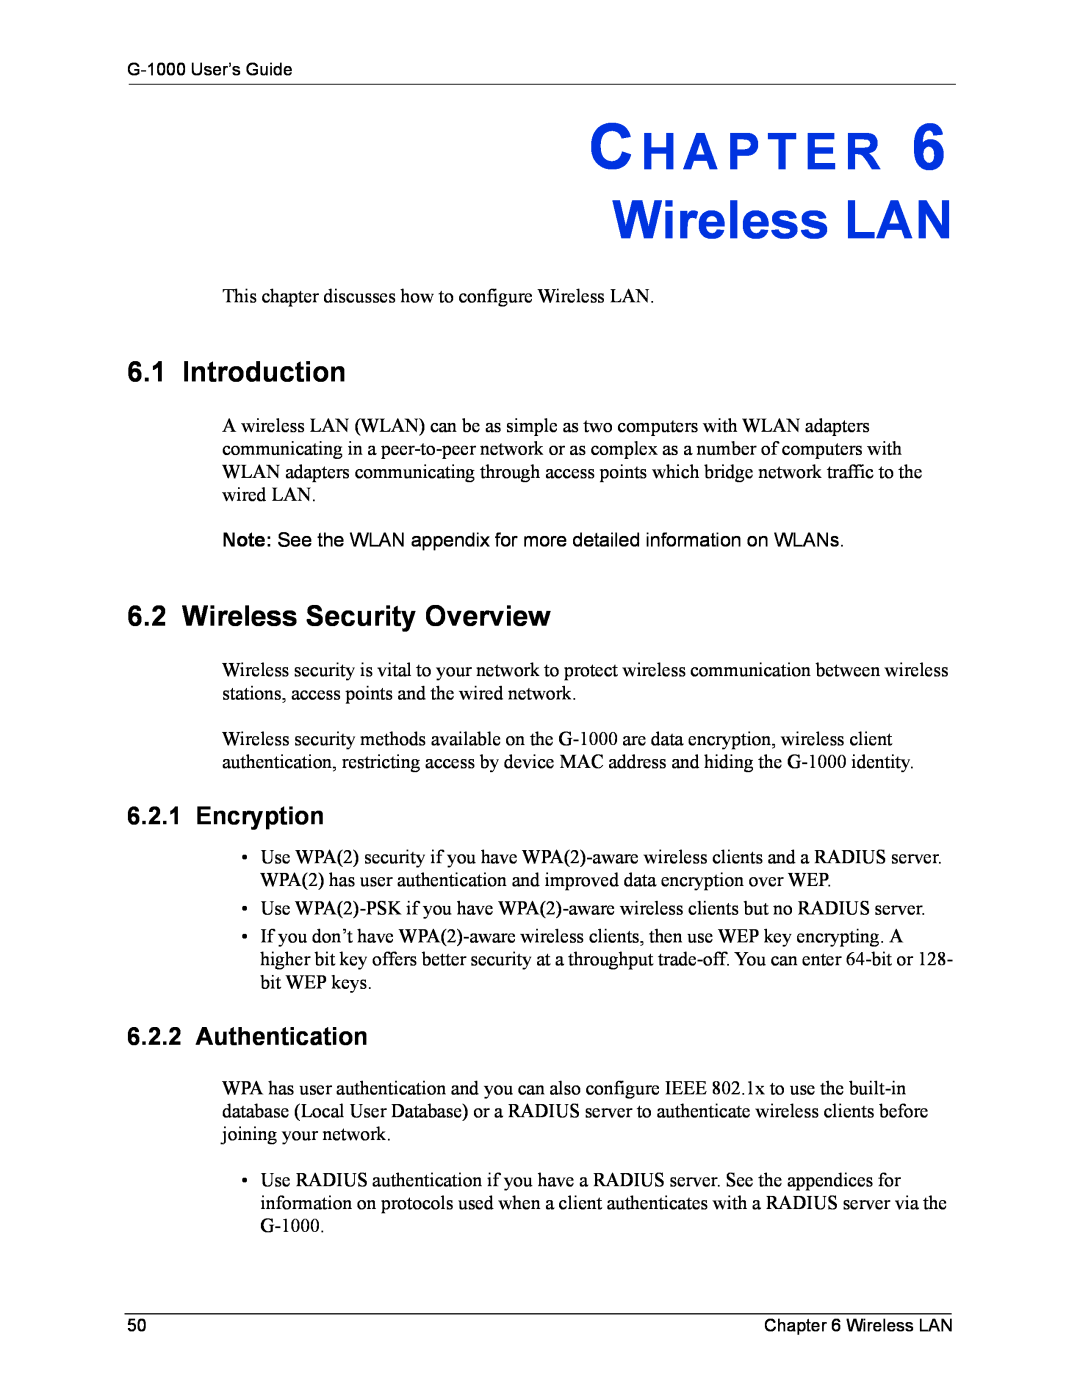 ZyXEL Communications G-1000 manual Wireless LAN, Introduction, Wireless Security Overview, Encryption, Authentication 